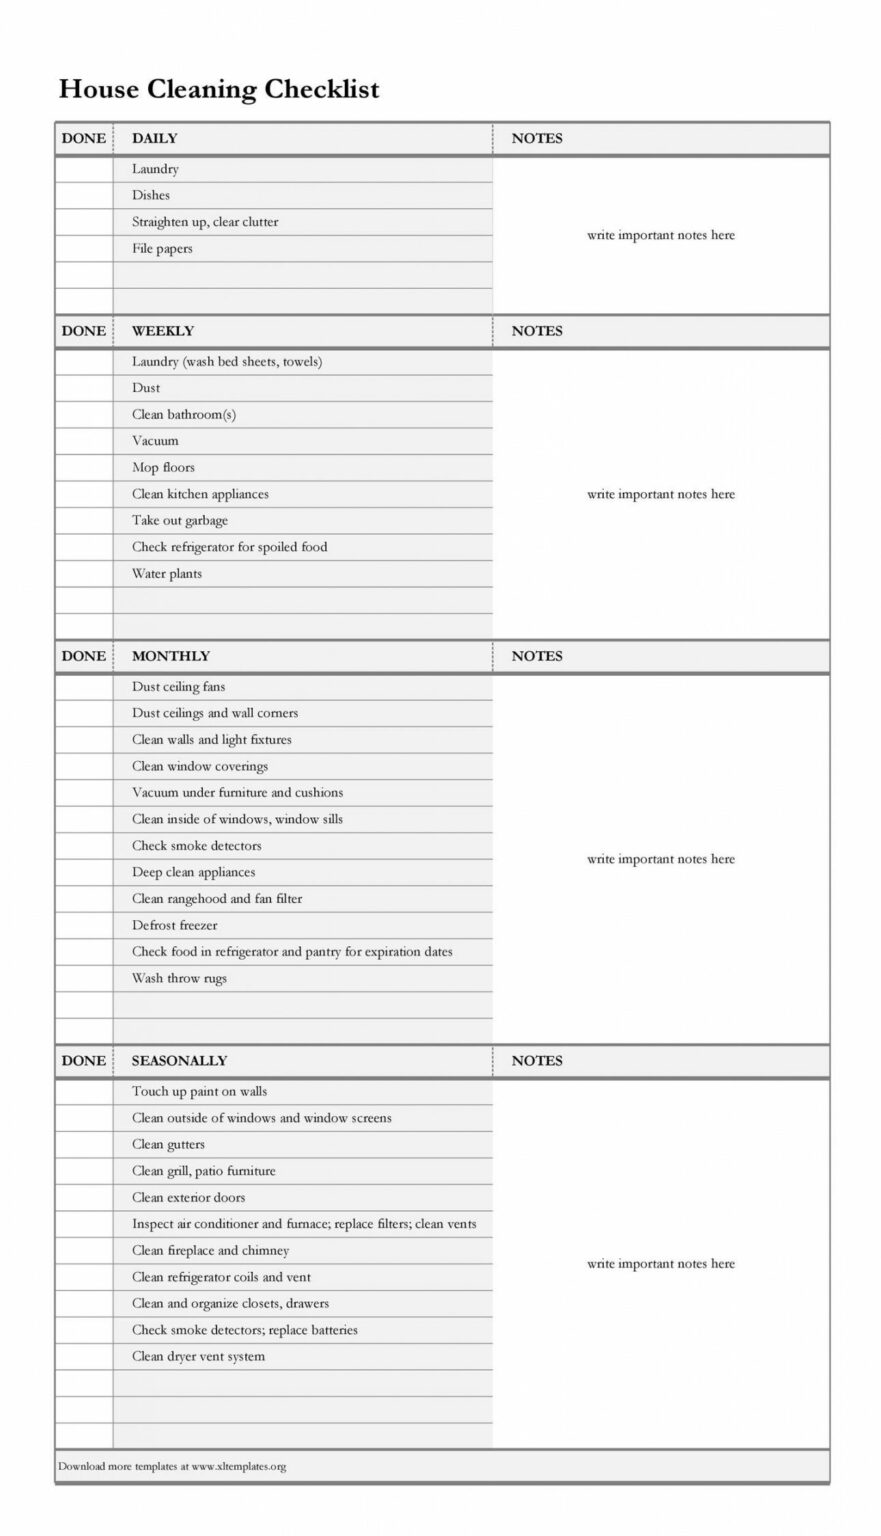 editable-40-printable-house-cleaning-checklist-templates-templatelab-daily-office-cleaning